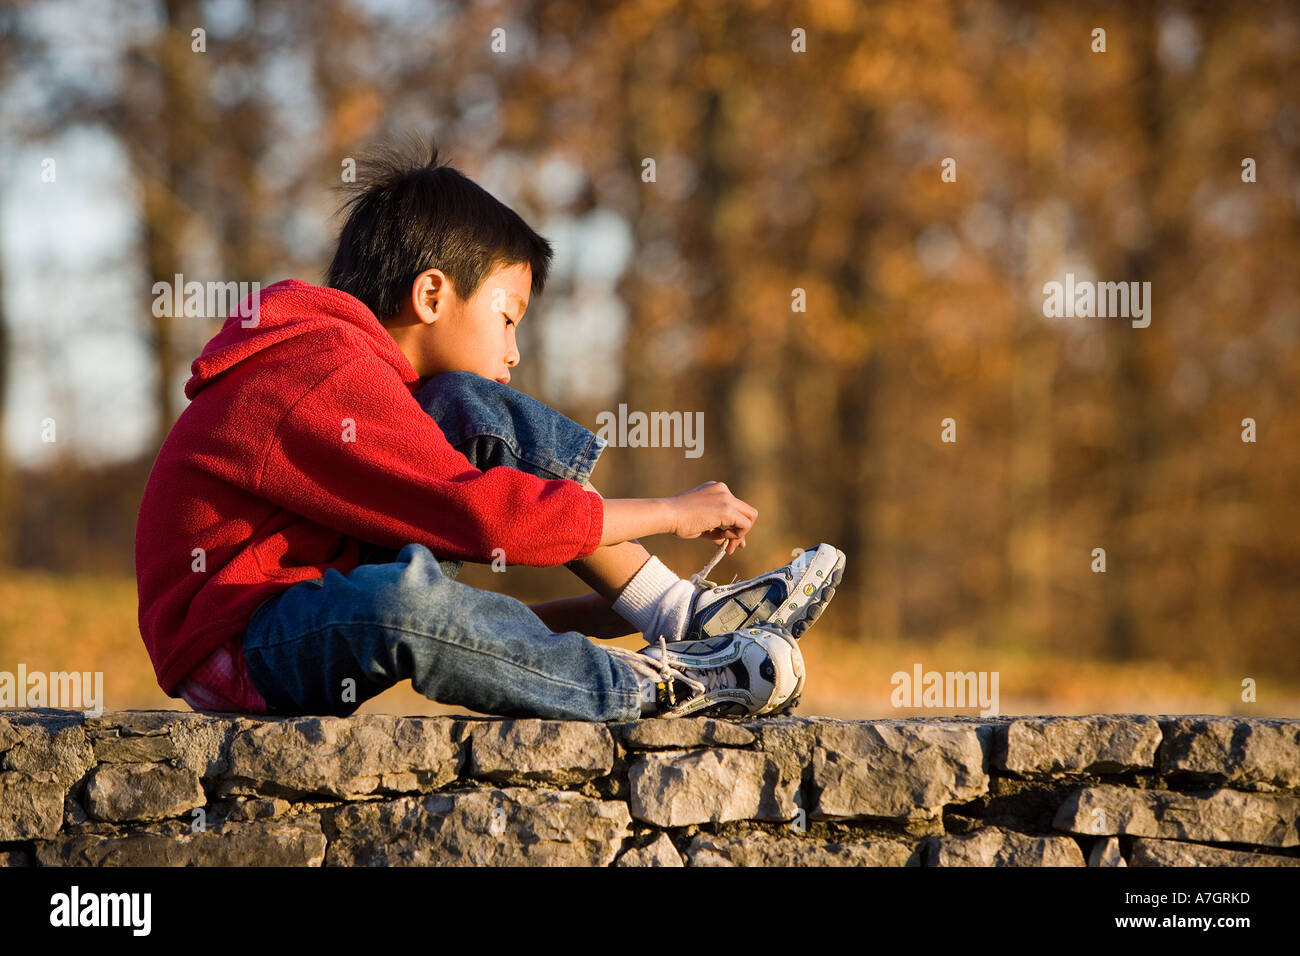 Asian boy on wall tying shoe, Tennessee Stock Photo